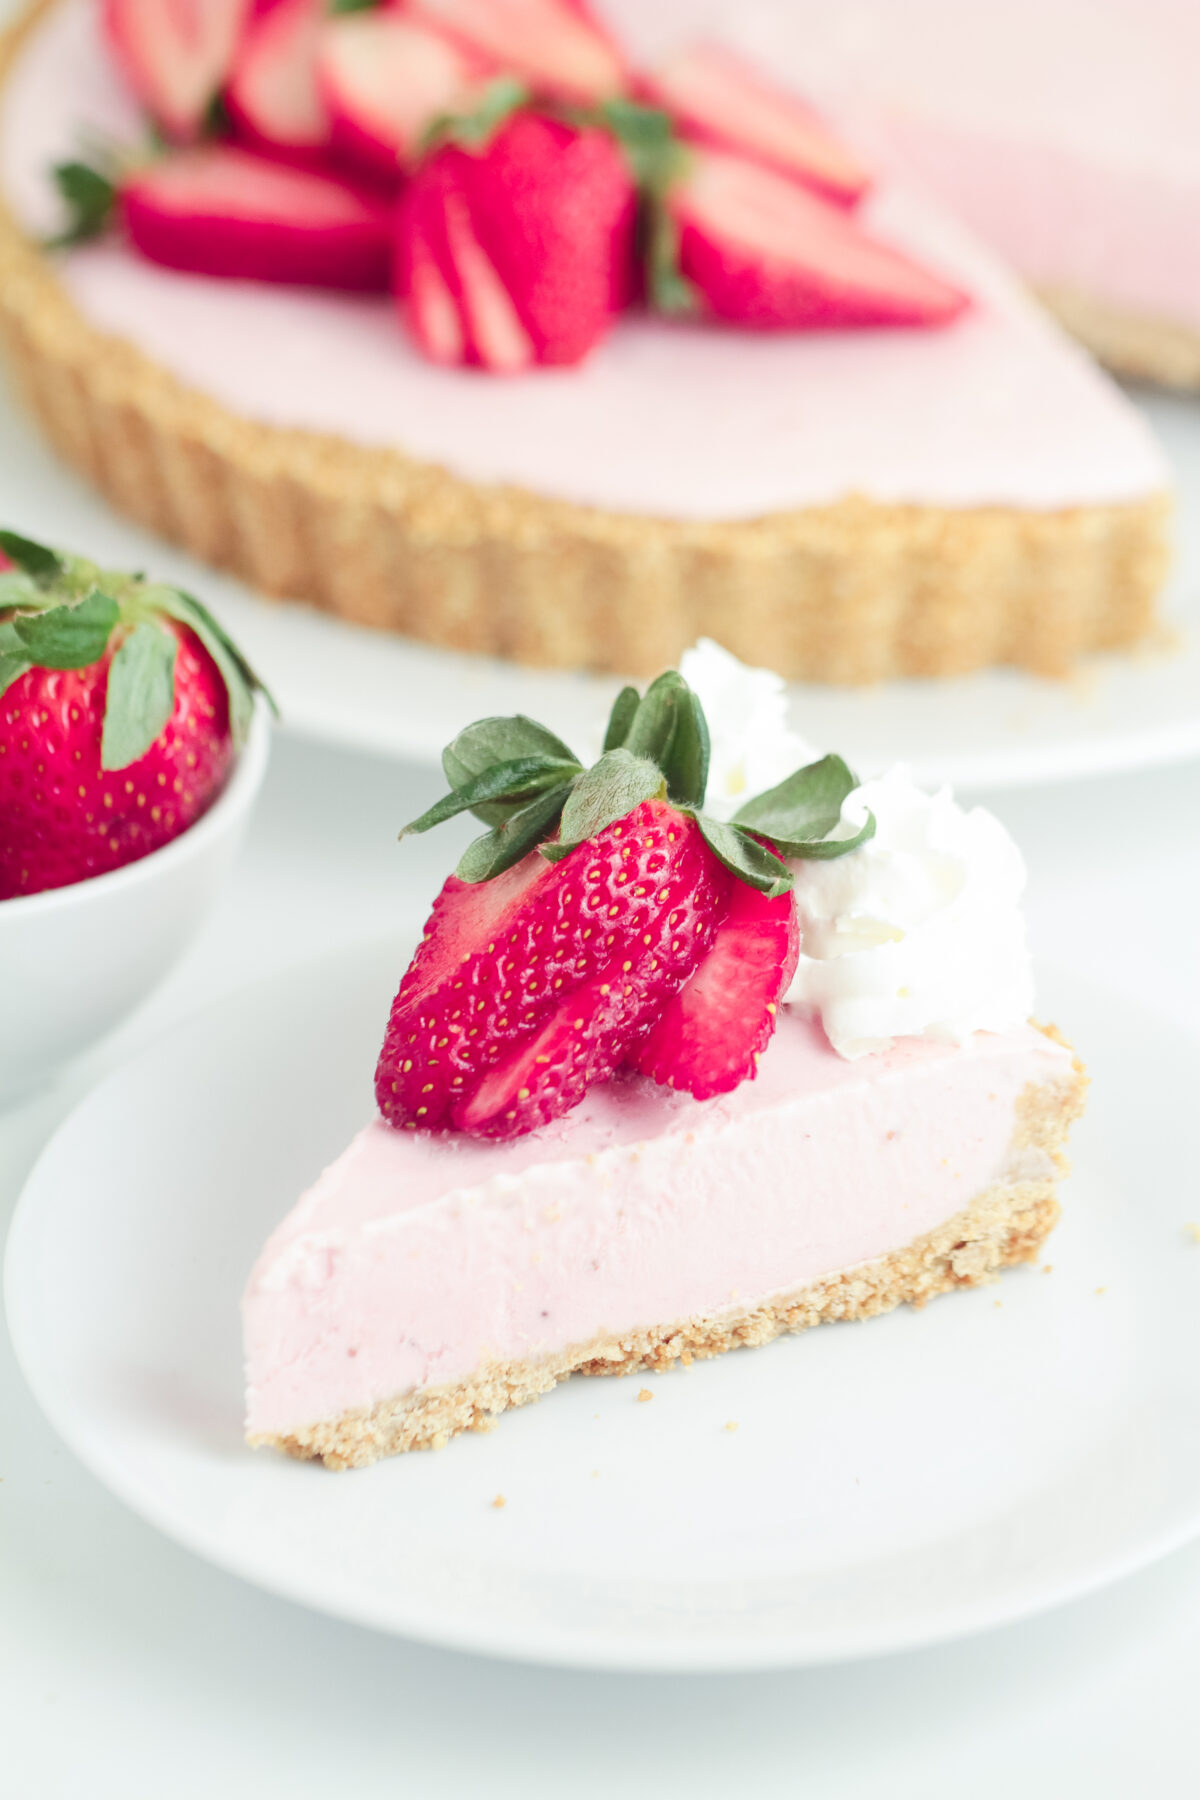 This easy No Bake Strawberry Cheesecake has a buttery cookie crust topped off with a creamy strawberry cheesecake filling.